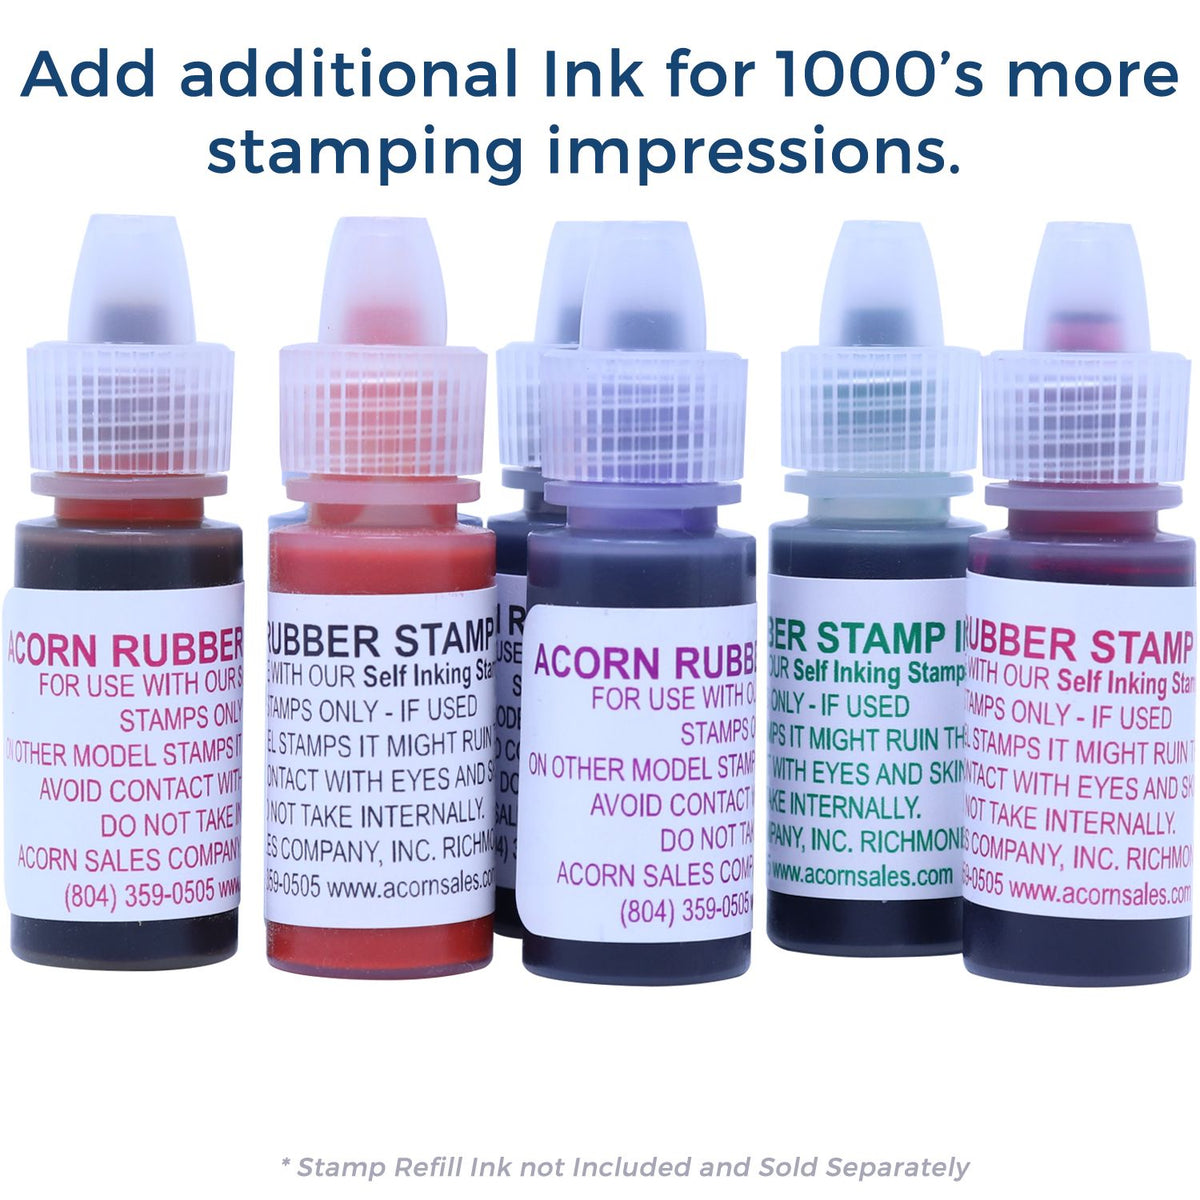 Refill Ink for Self-Inking Round A+ Stamp Available